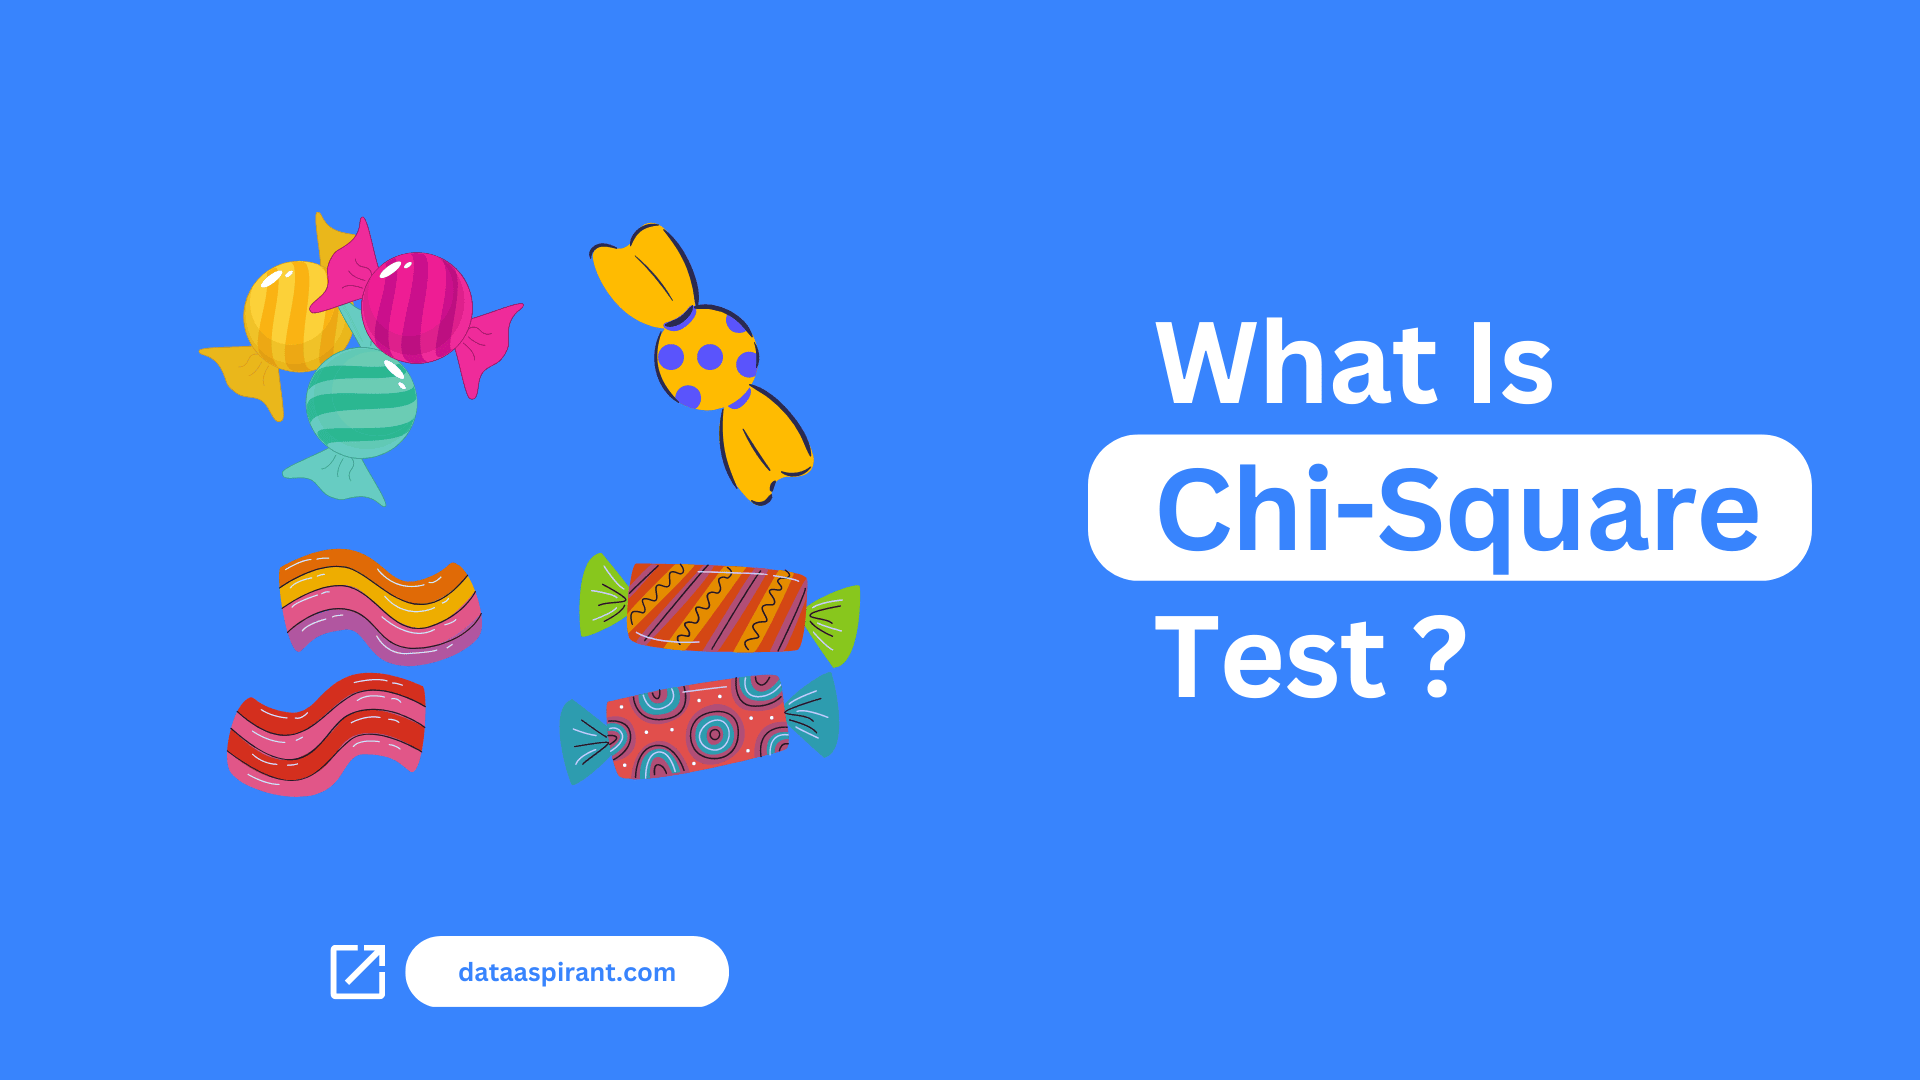 What Is Chi-Square Test